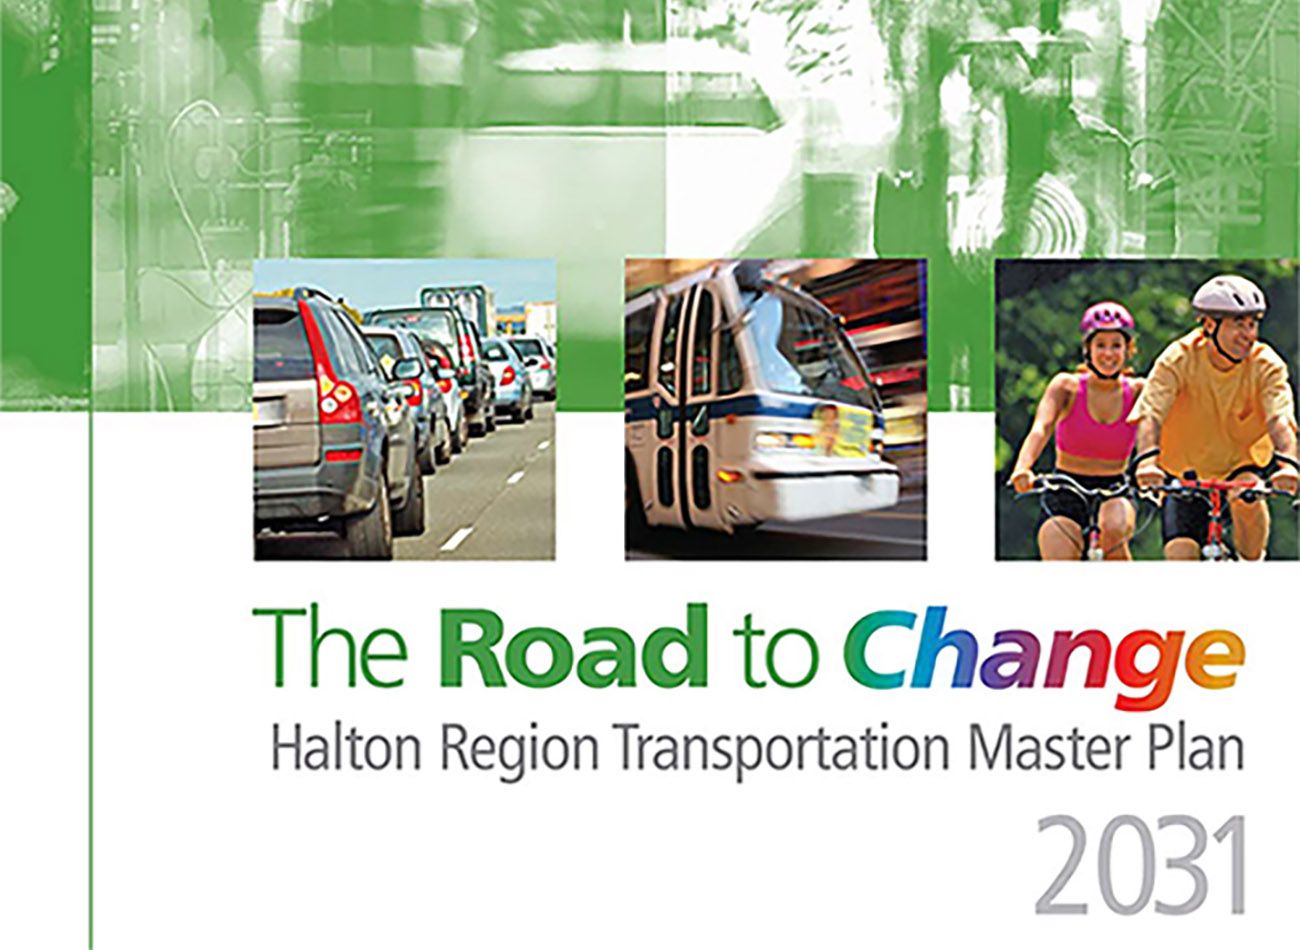 Transportation Master Plan to 2031 - The Road to Change